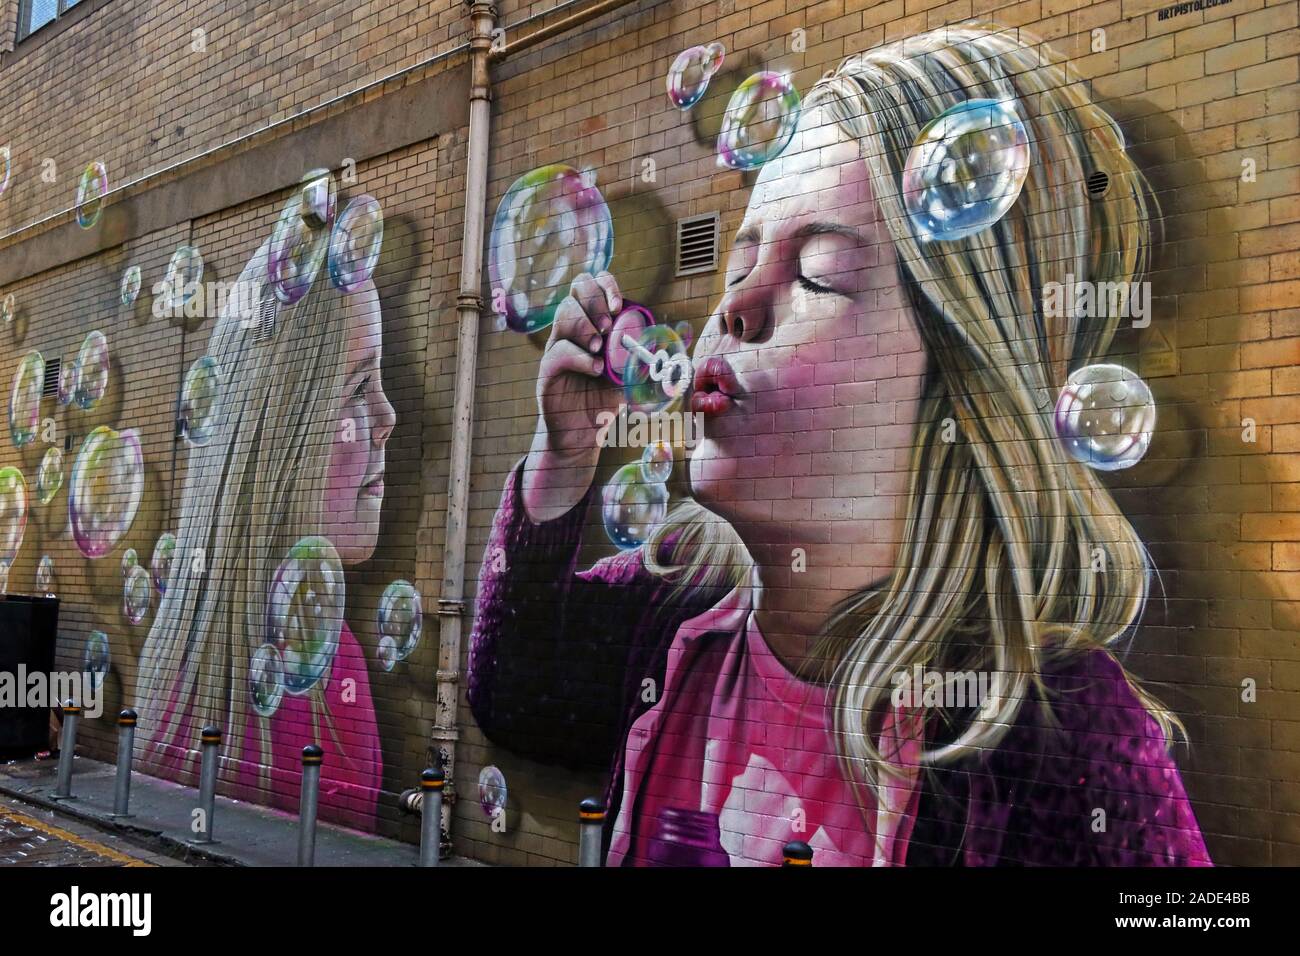 Girl Blowing Bubbles, Painted ArtWork, by Rogue and Art Pistol 2019, Renfield Lane, Glasgow, Scozia, Regno Unito, G2 5AR Foto Stock